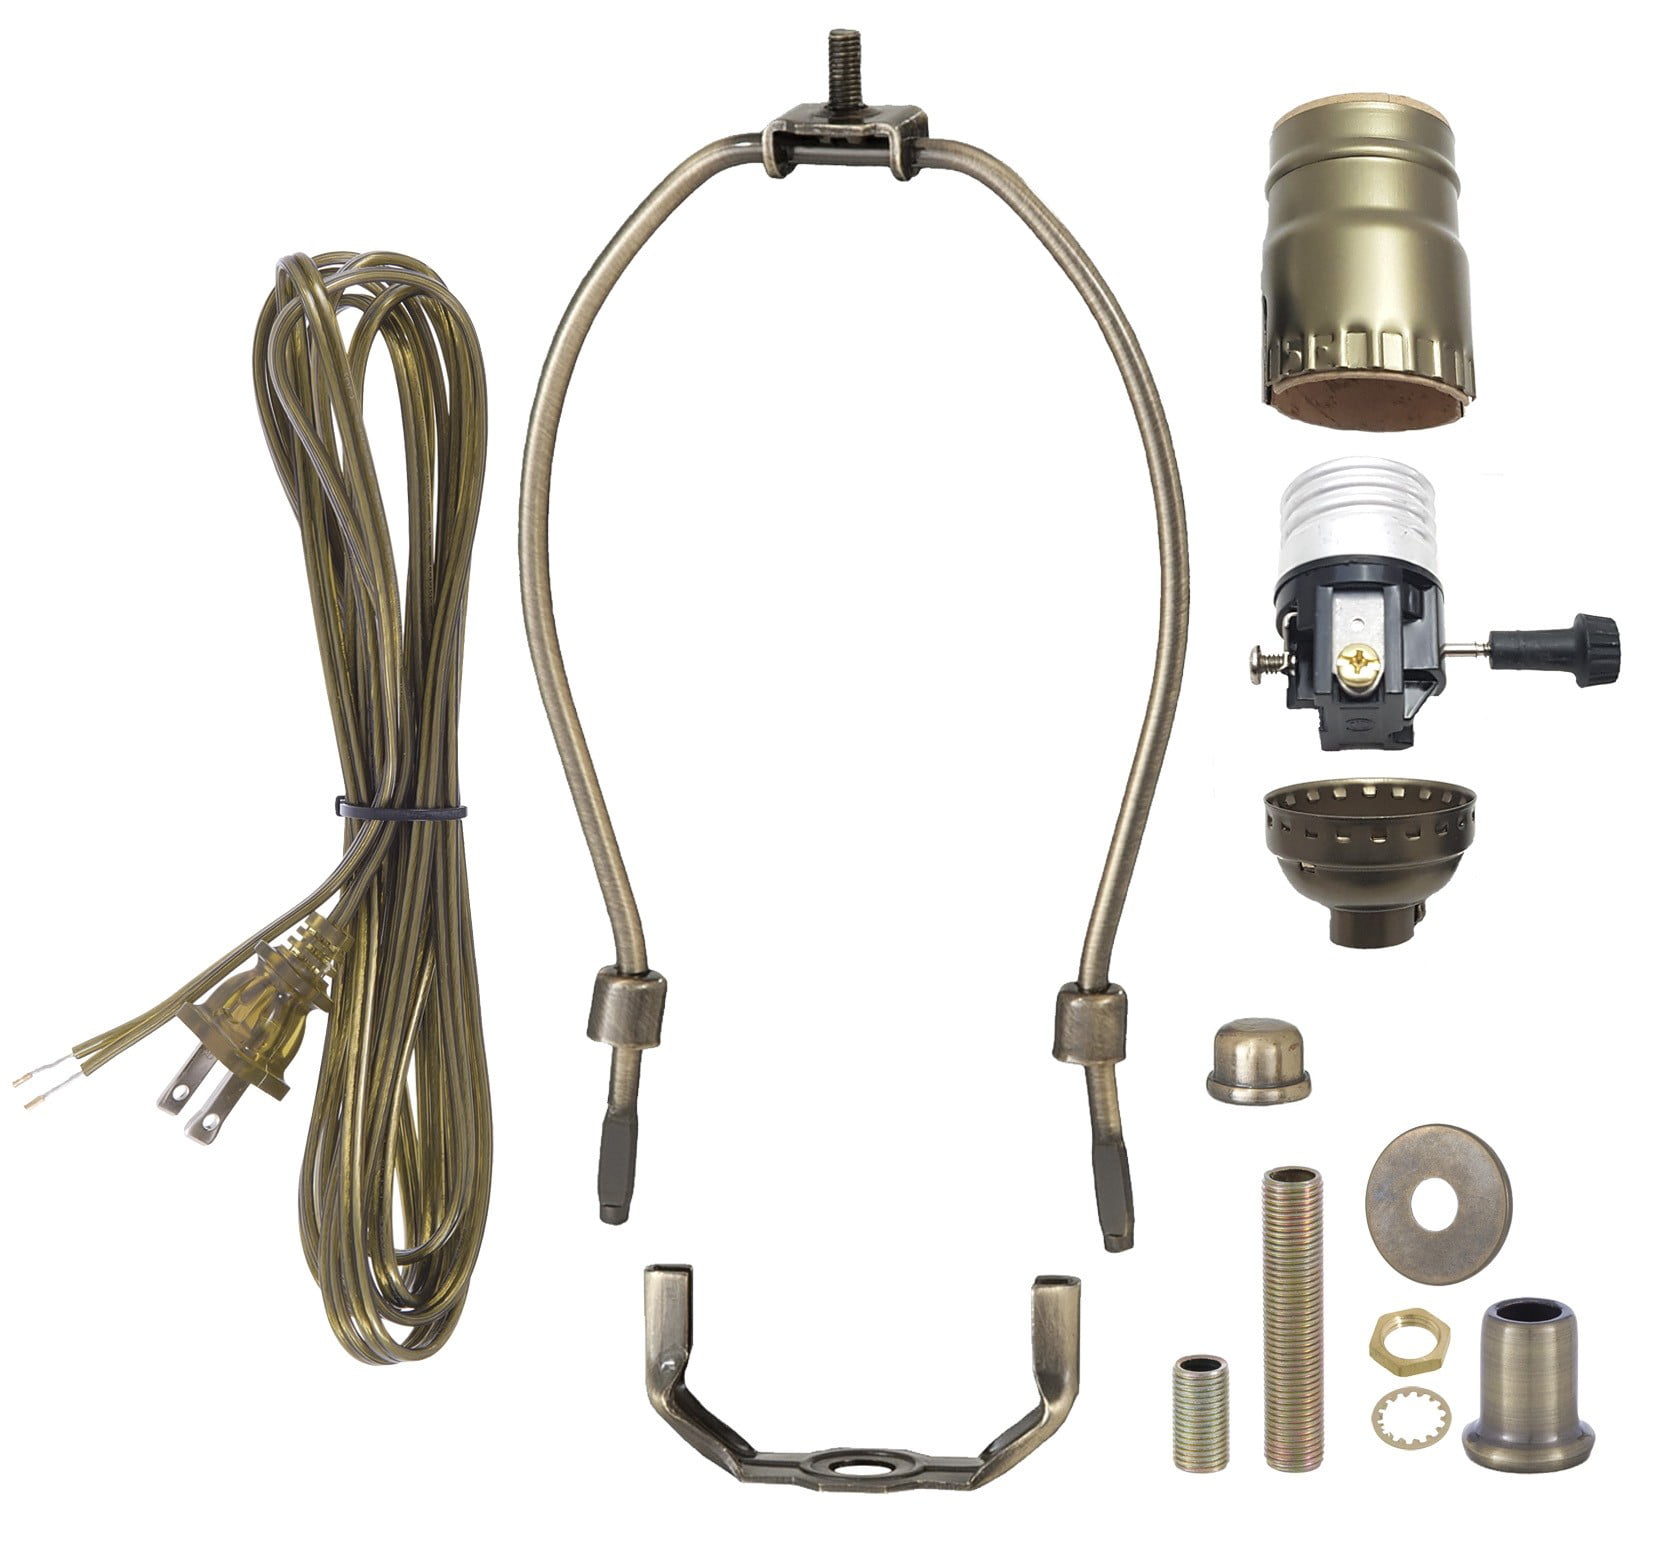 B&P Lamp Antique Brass Table Lamp Wiring Kit with 3-way Socket, 8 foot cord, finial, riser, nut ...